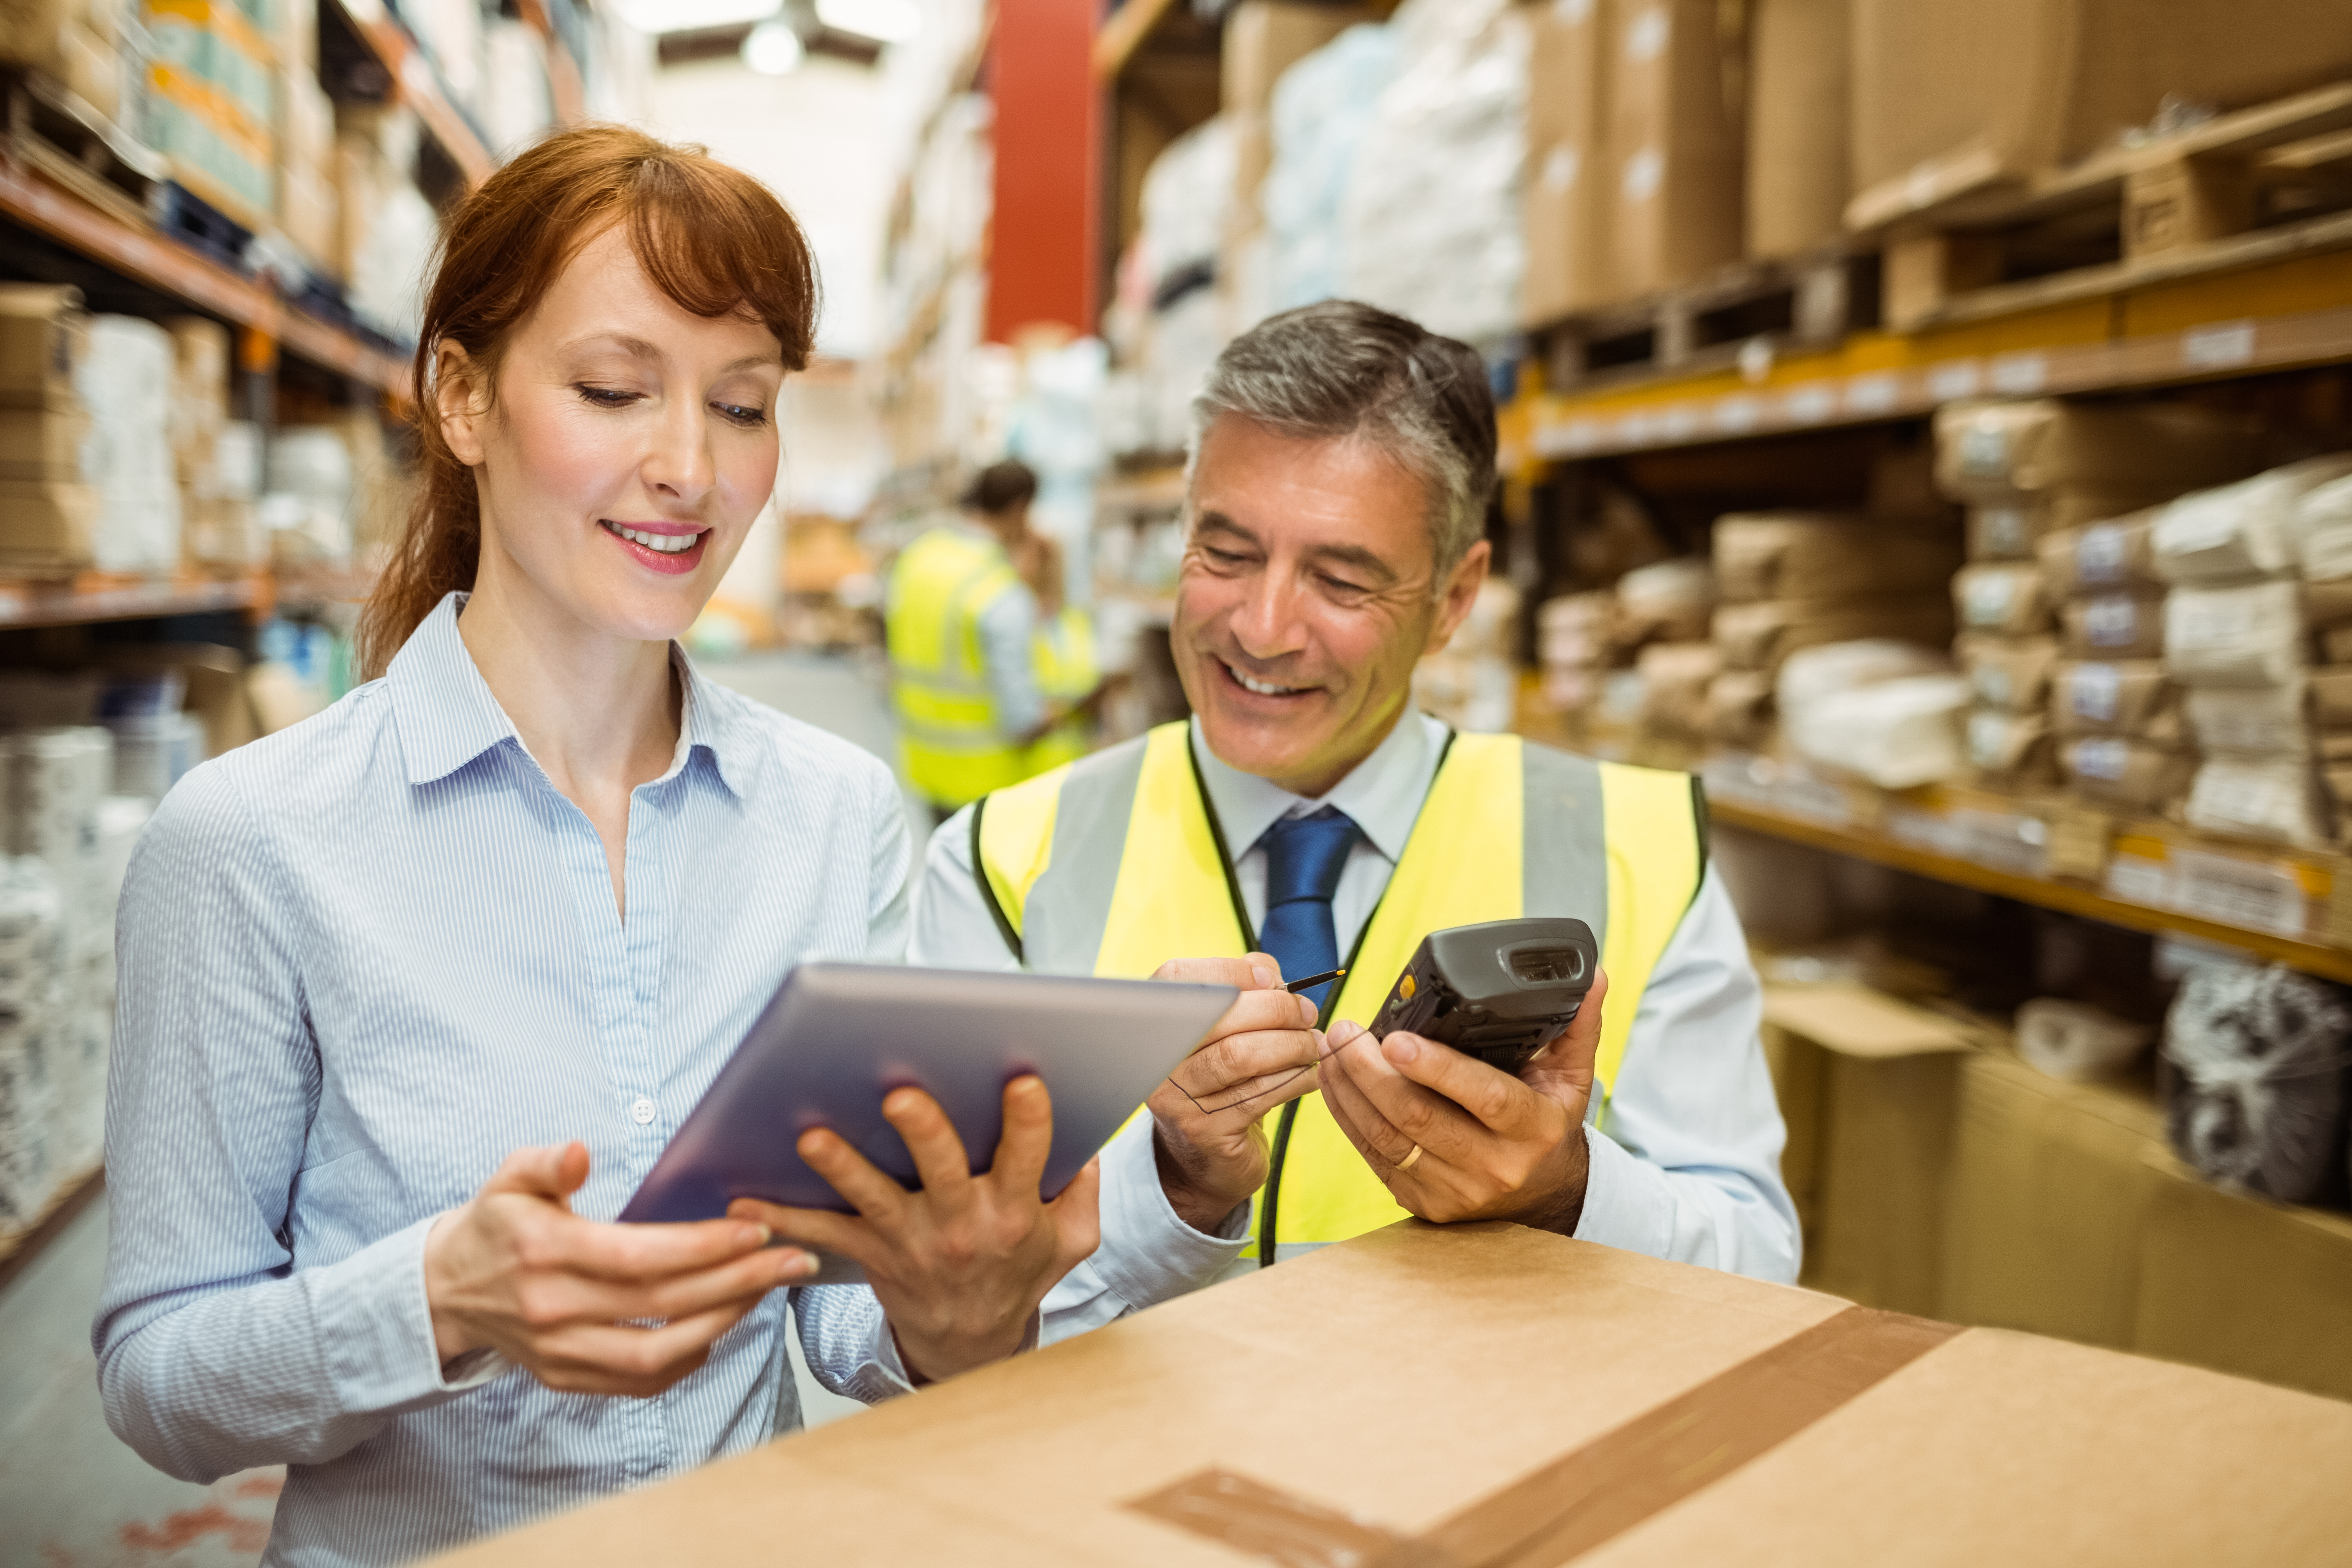 2 people in a warehouse looking at a tablet